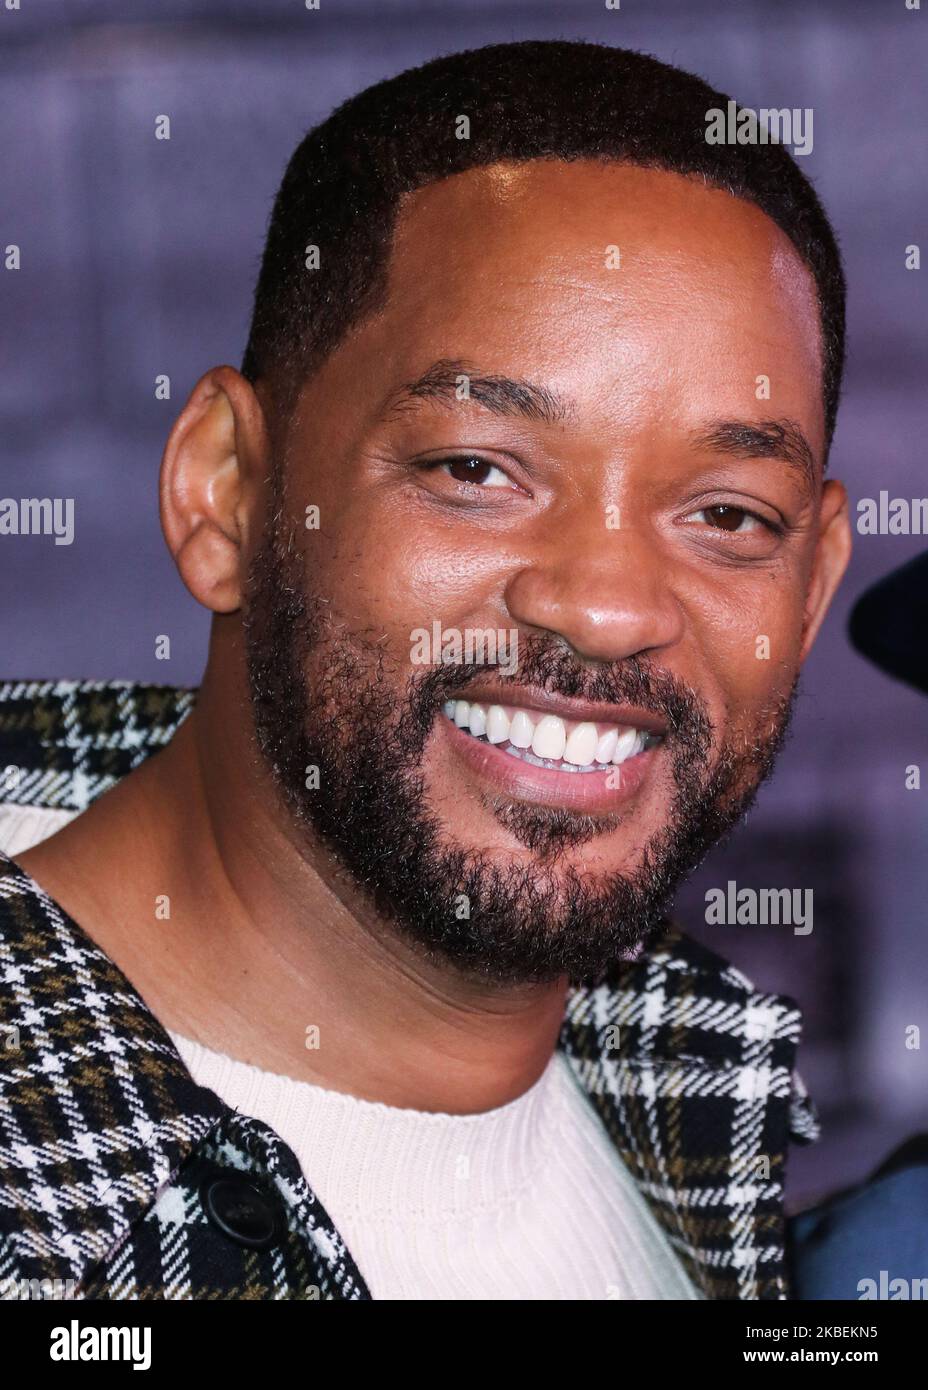 HOLLYWOOD, LOS ANGELES, CALIFORNIA, USA - JANUARY 14: Actor Will Smith arrives at the Los Angeles Premiere Of Columbia Pictures' 'Bad Boys For Life' held at the TCL Chinese Theatre IMAX on January 14, 2020 in Hollywood, Los Angeles, California, United States. (Photo by Xavier Collin/Image Press Agency/NurPhoto) Stock Photo